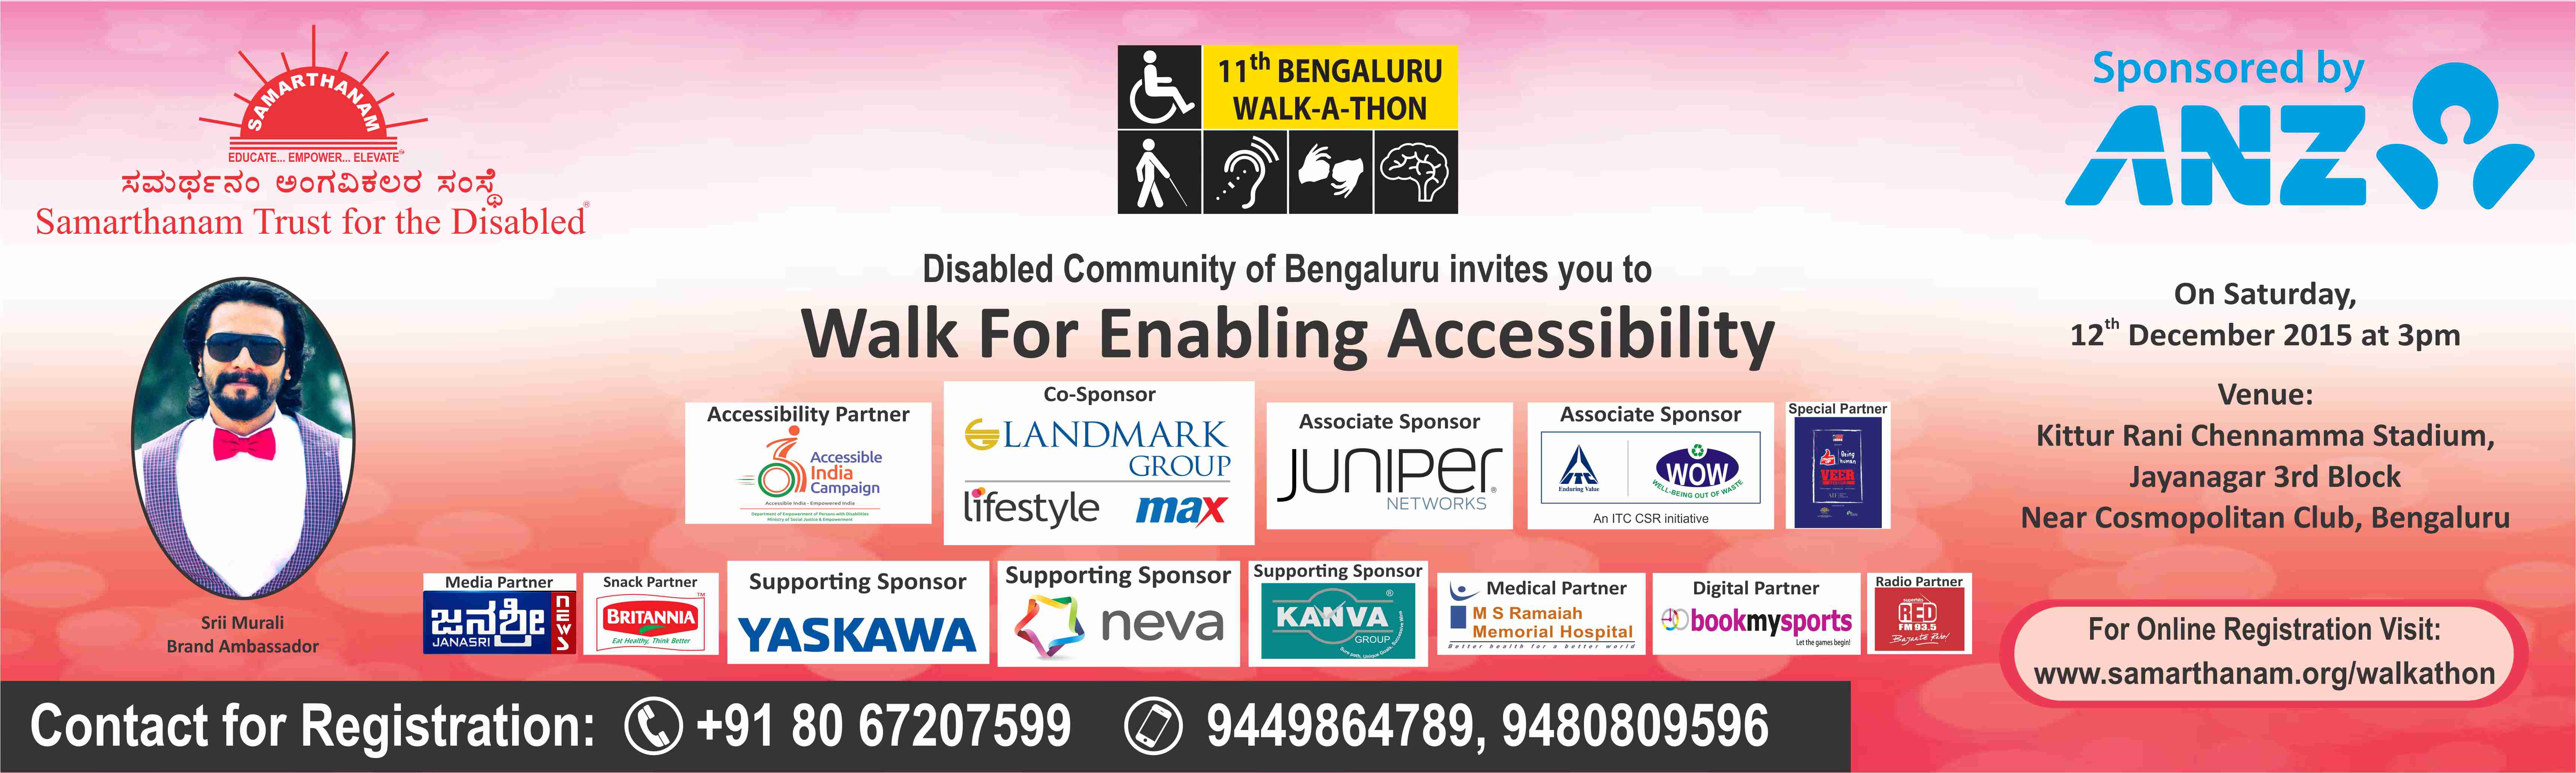 walk for enabling accessibility banner